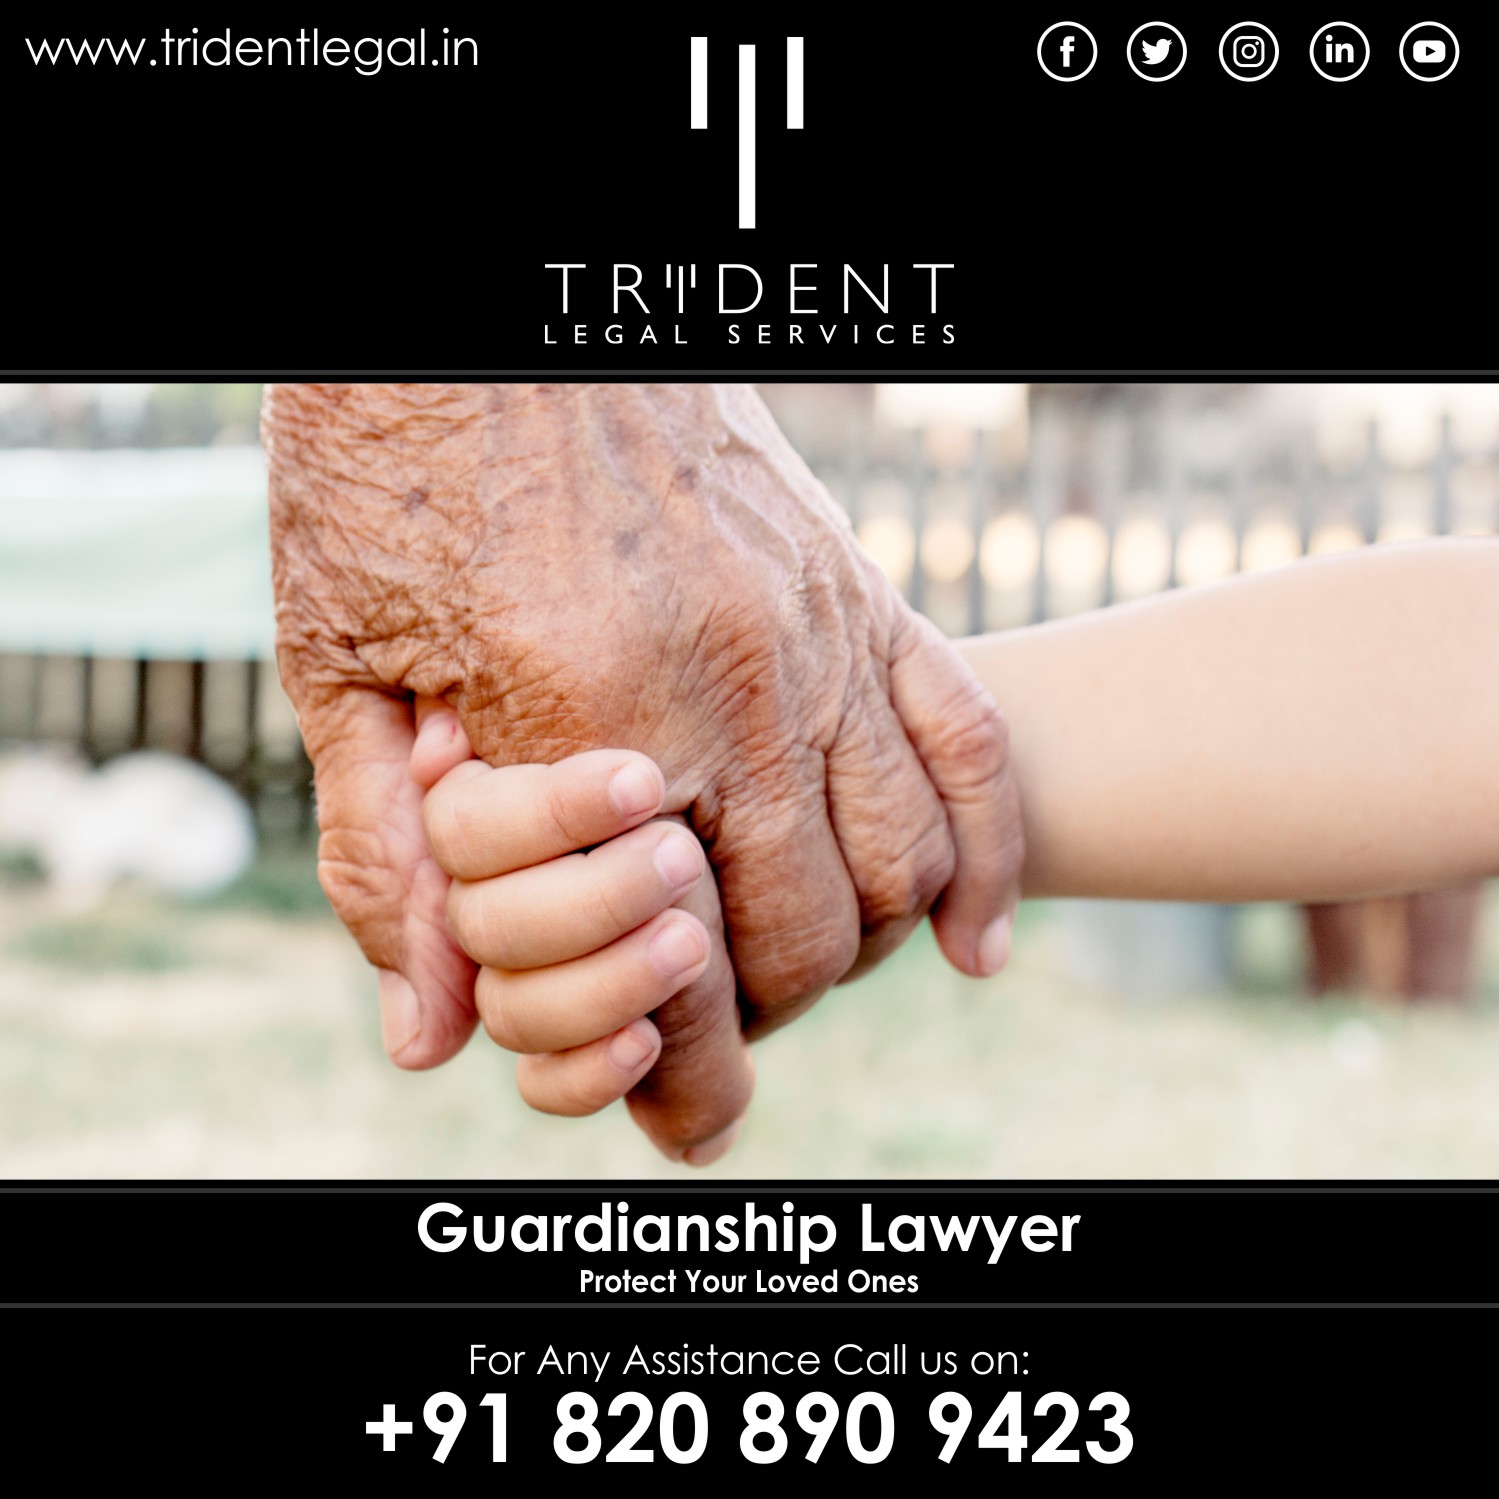 Guardianship Lawyer in Pune